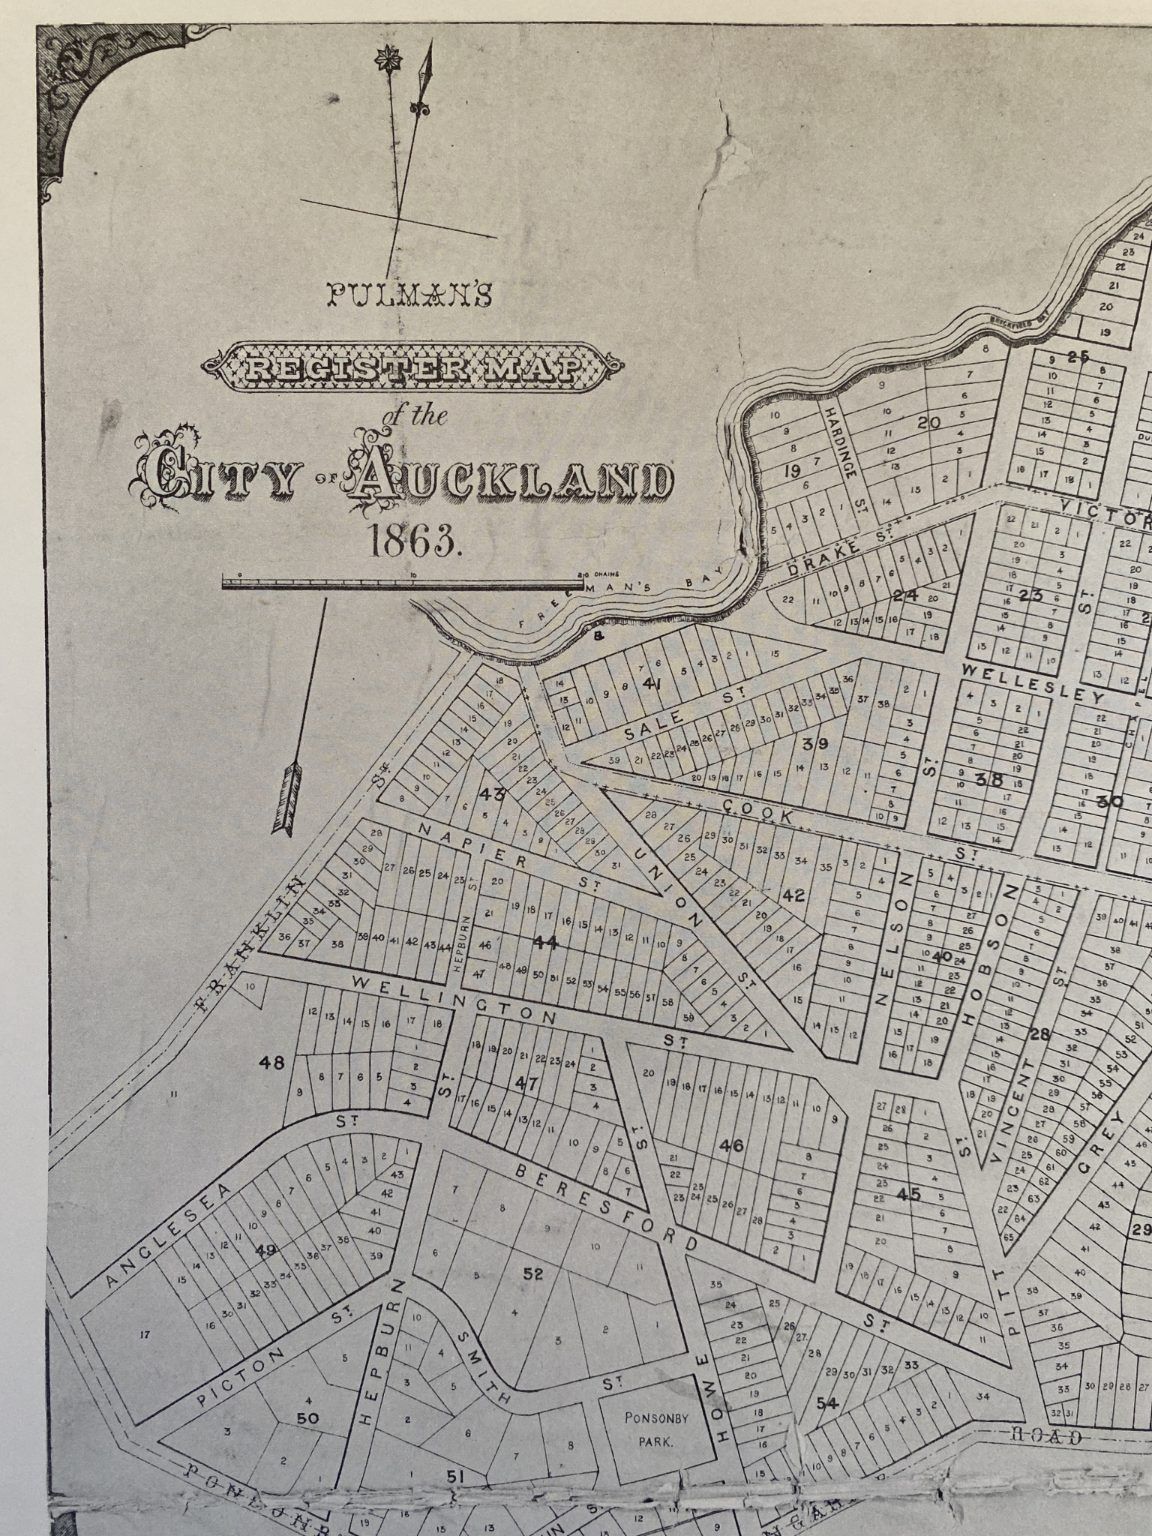 VINTAGE MAP: Pulman's Register Map of the City of Auckland 1863